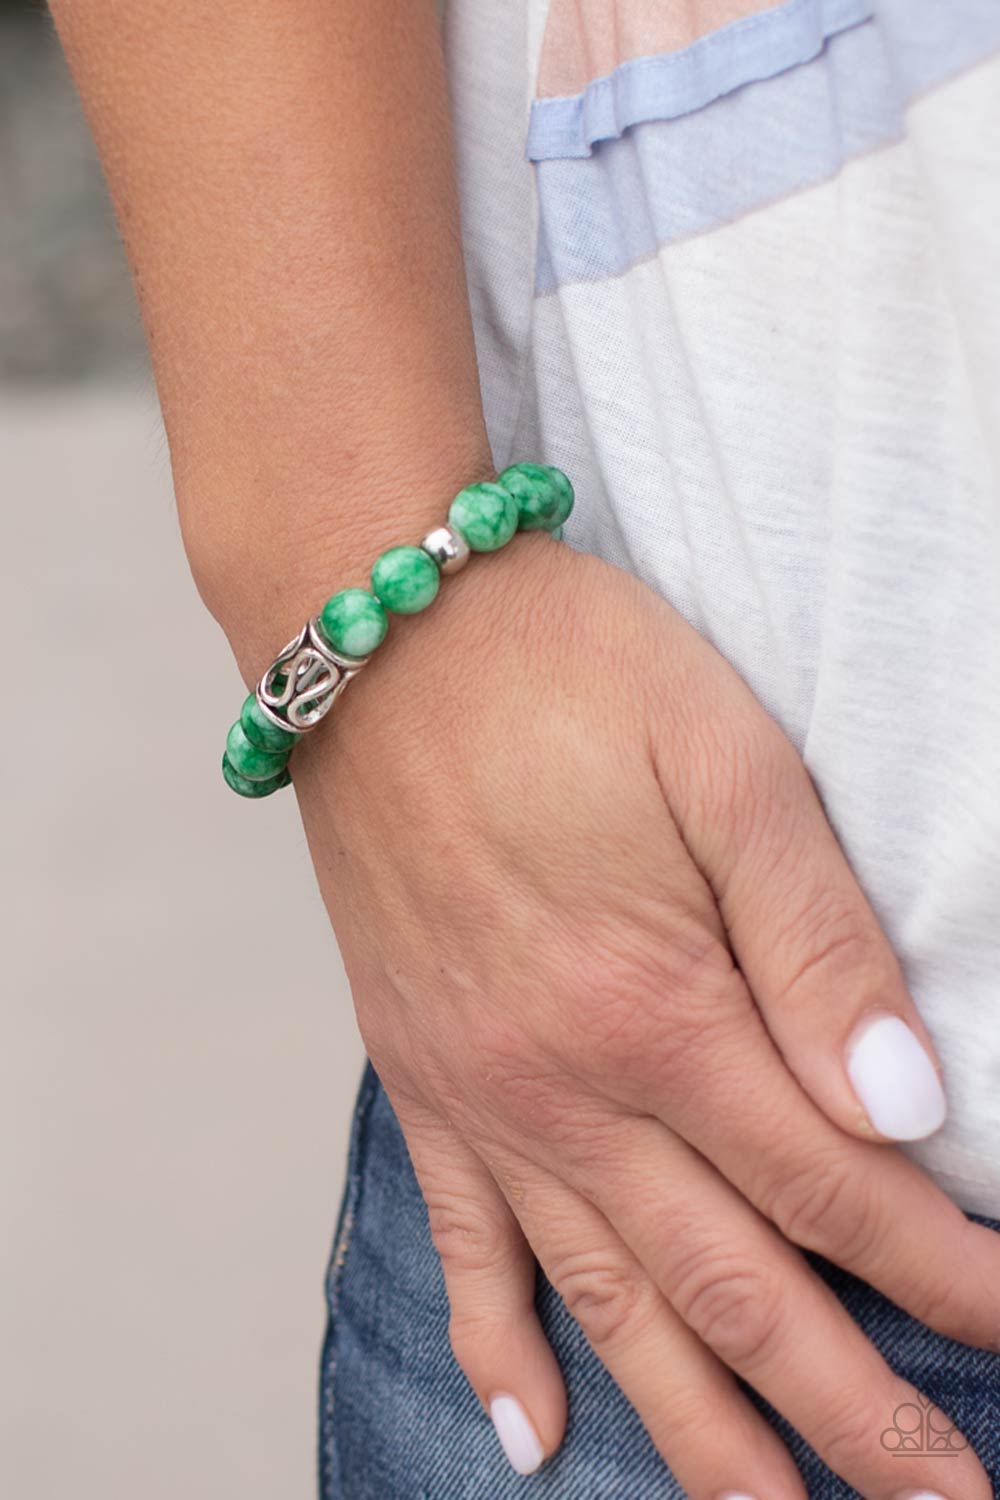 Soothes The Soul - Green Jade - Silver Bracelet - Paparazzi Accessories - Infused with an ornate silver centerpiece, an earthy collection of silver and jade beads are threaded along a stretchy band around the wrist for a seasonal flair. Sold as one individual bracelet.